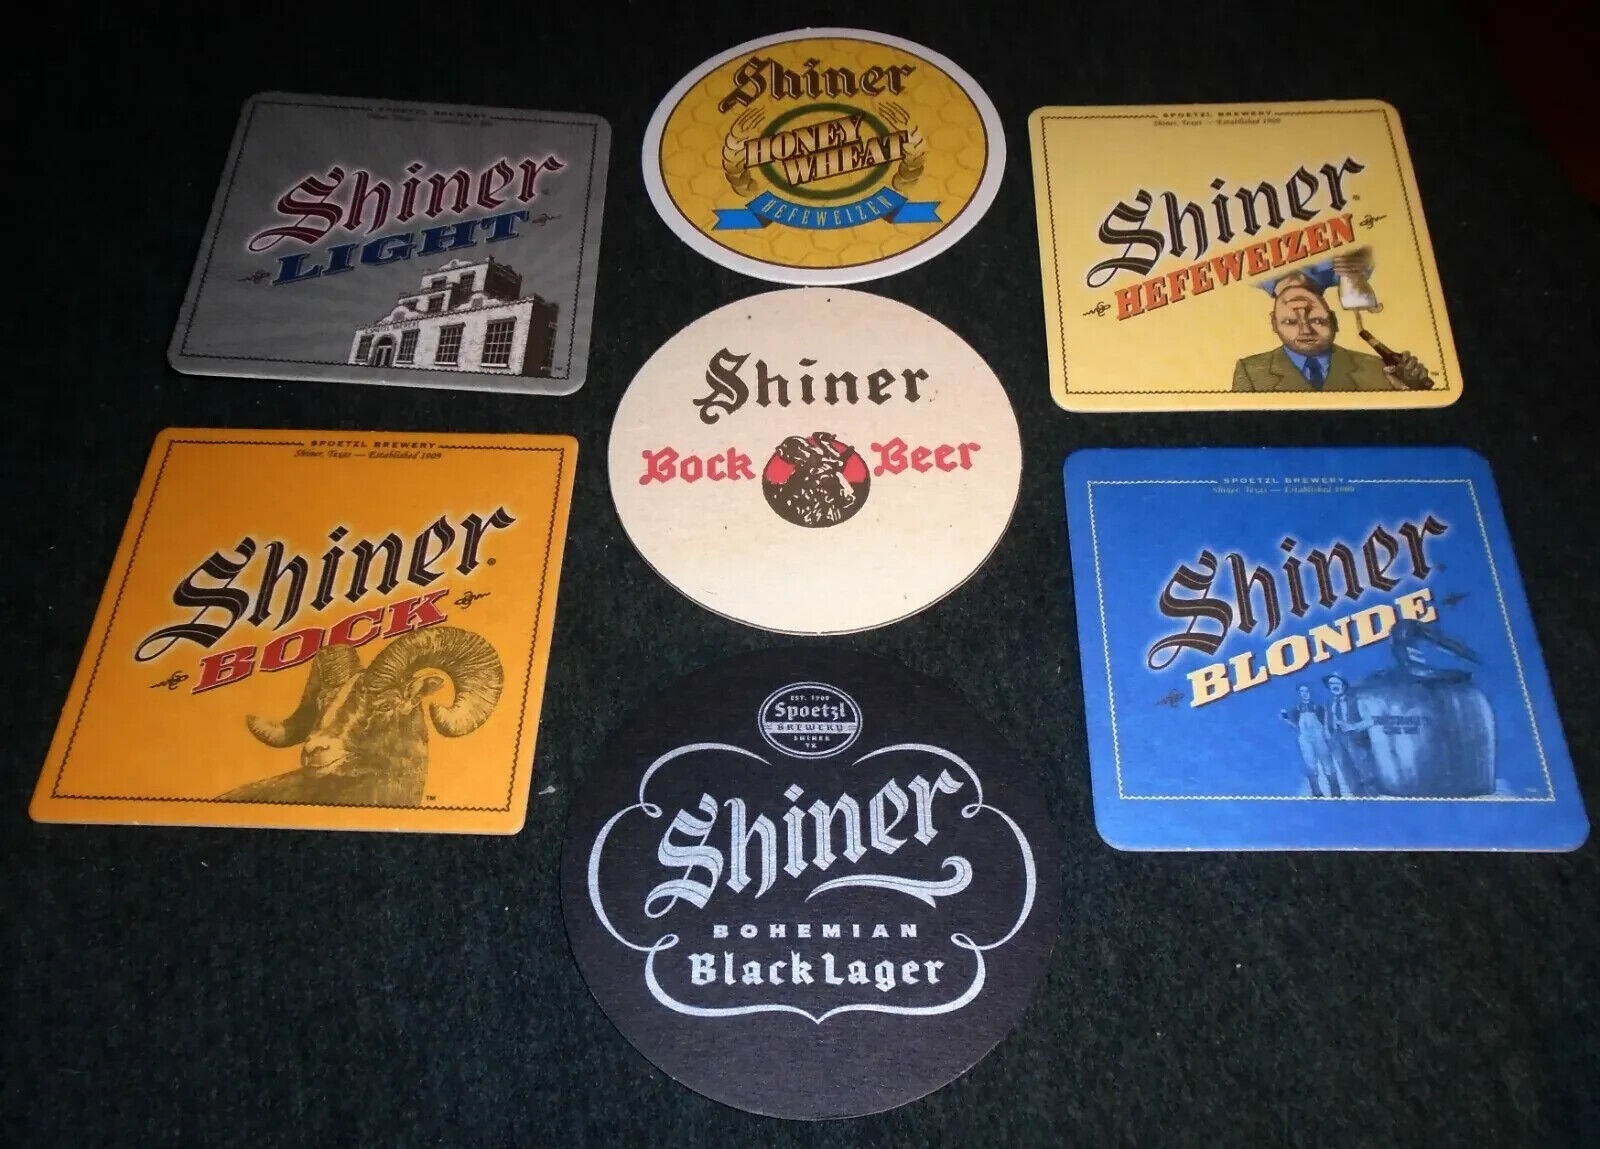 Lot of 7 Different Shiner Beer, Shiner Bock, Texas Brewery Vintage Beer Coasters